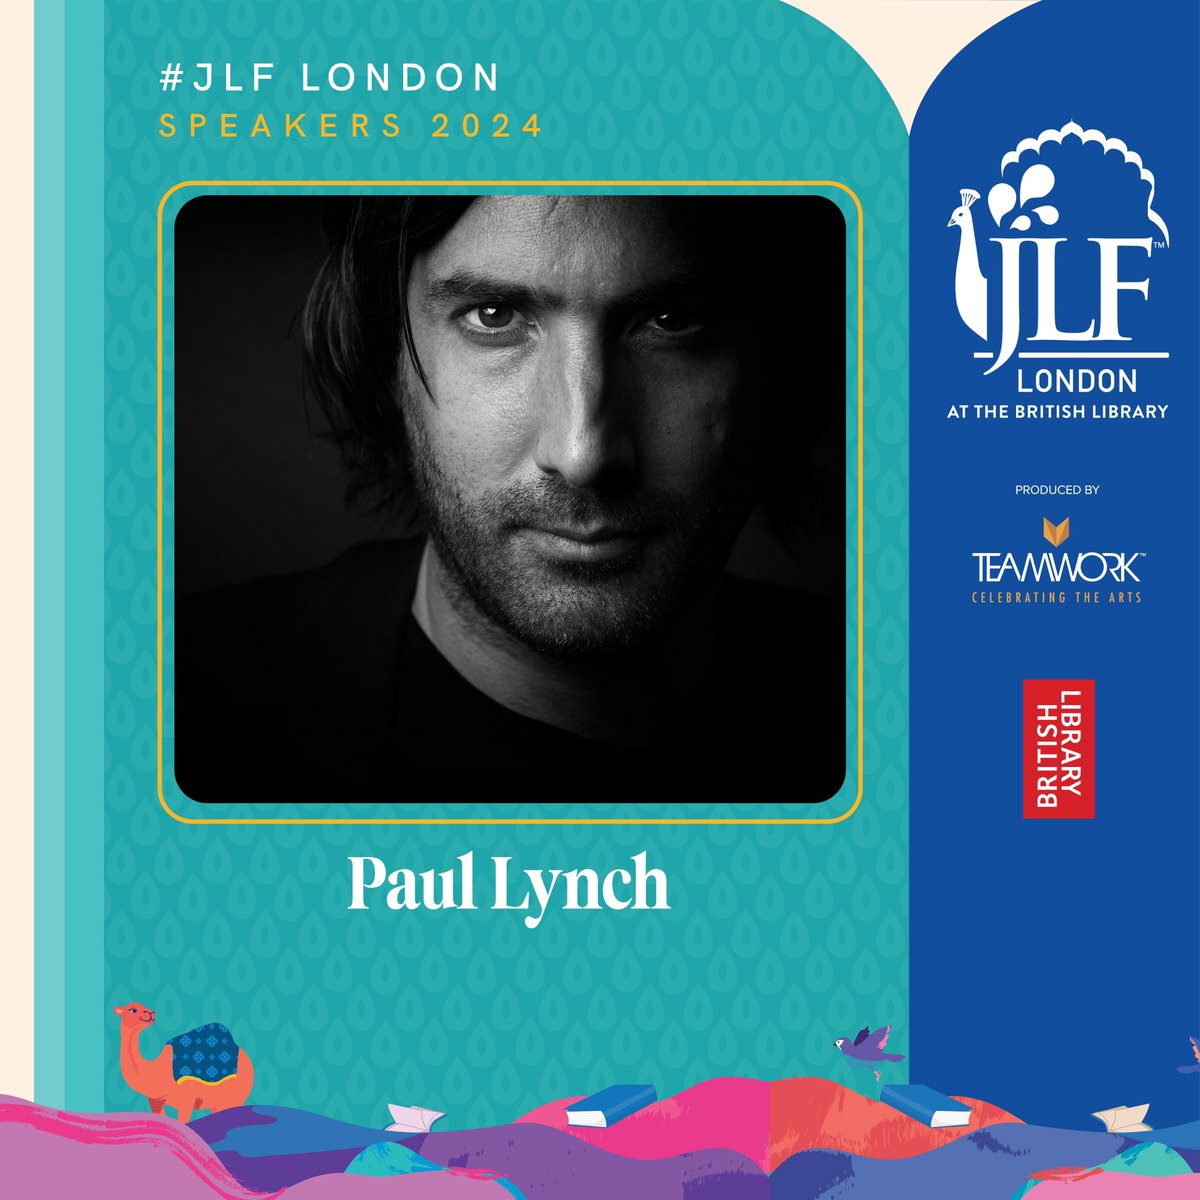 Have you booked your spot yet? JLF London is returning to the British Library with an exceptional line-up of speakers from across the globe. You simply cannot miss out! #literaturefestival